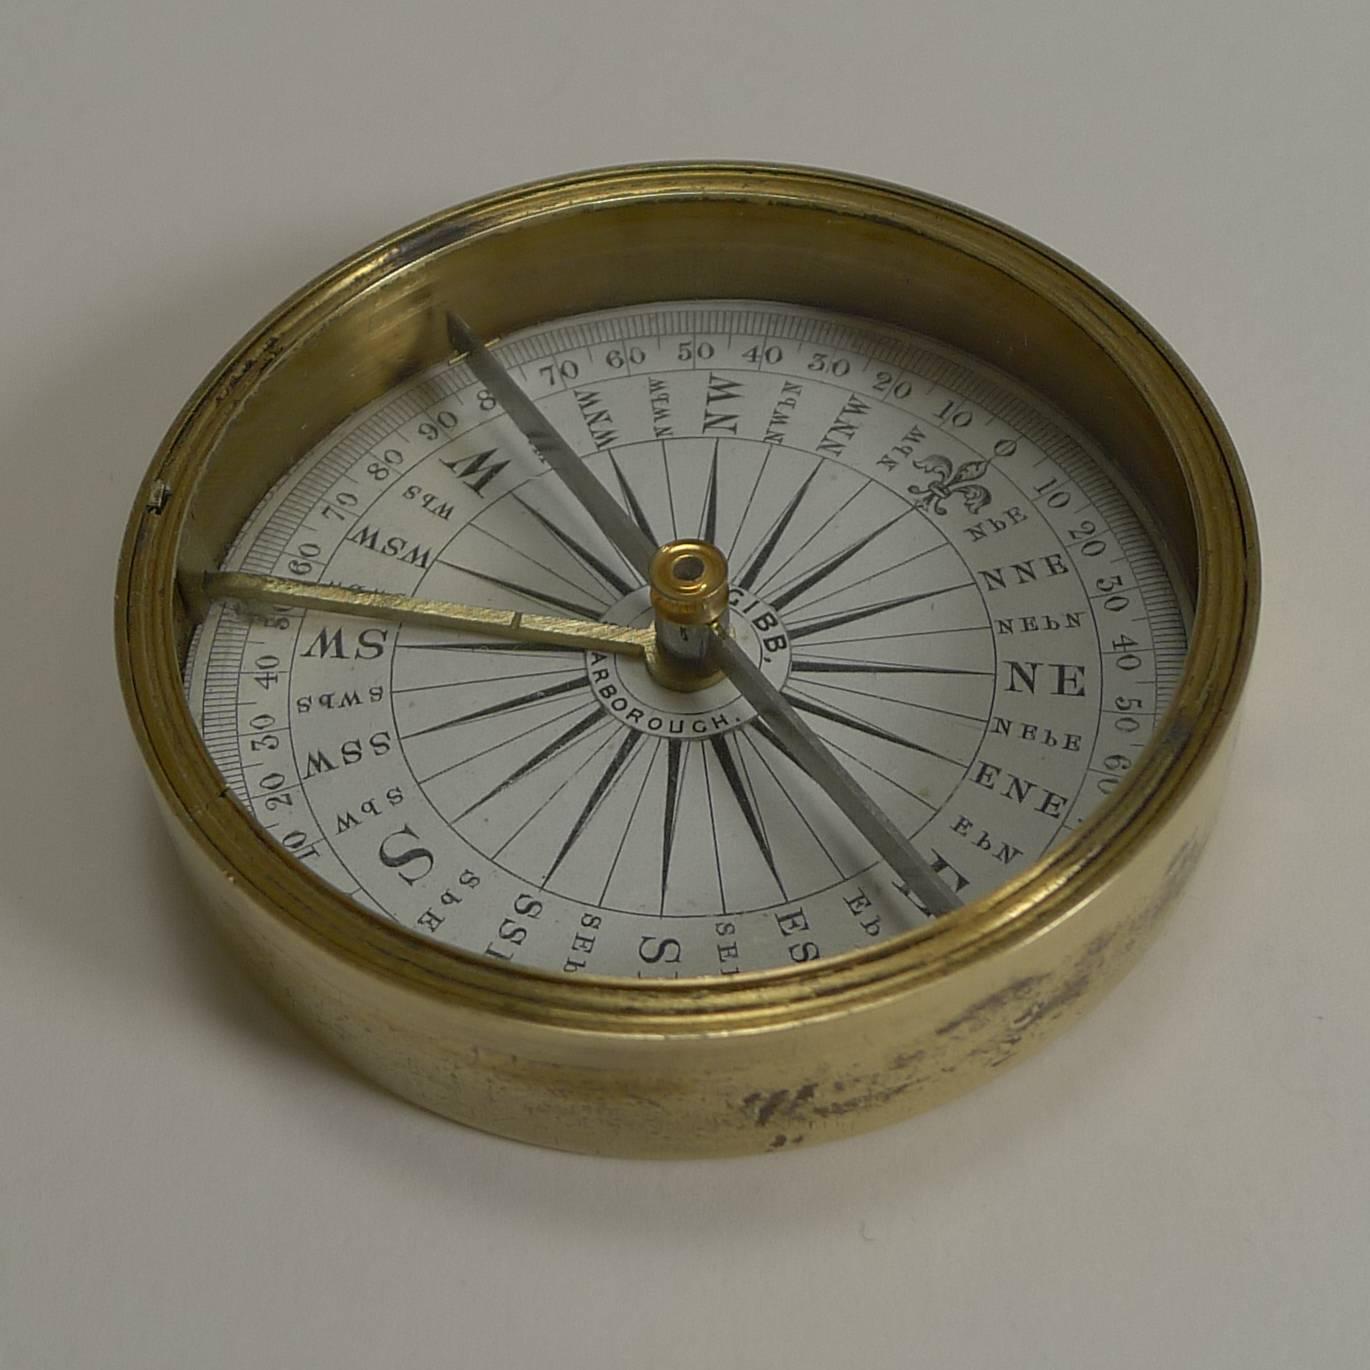 A handsome Victorian pocket / explorer compass with a cross bar needle pivoting on a jewelled bearing above a traditional dial.

Complete in it's brass case and lid and incorporates a transit lock activated when the lid is in place, the compass is